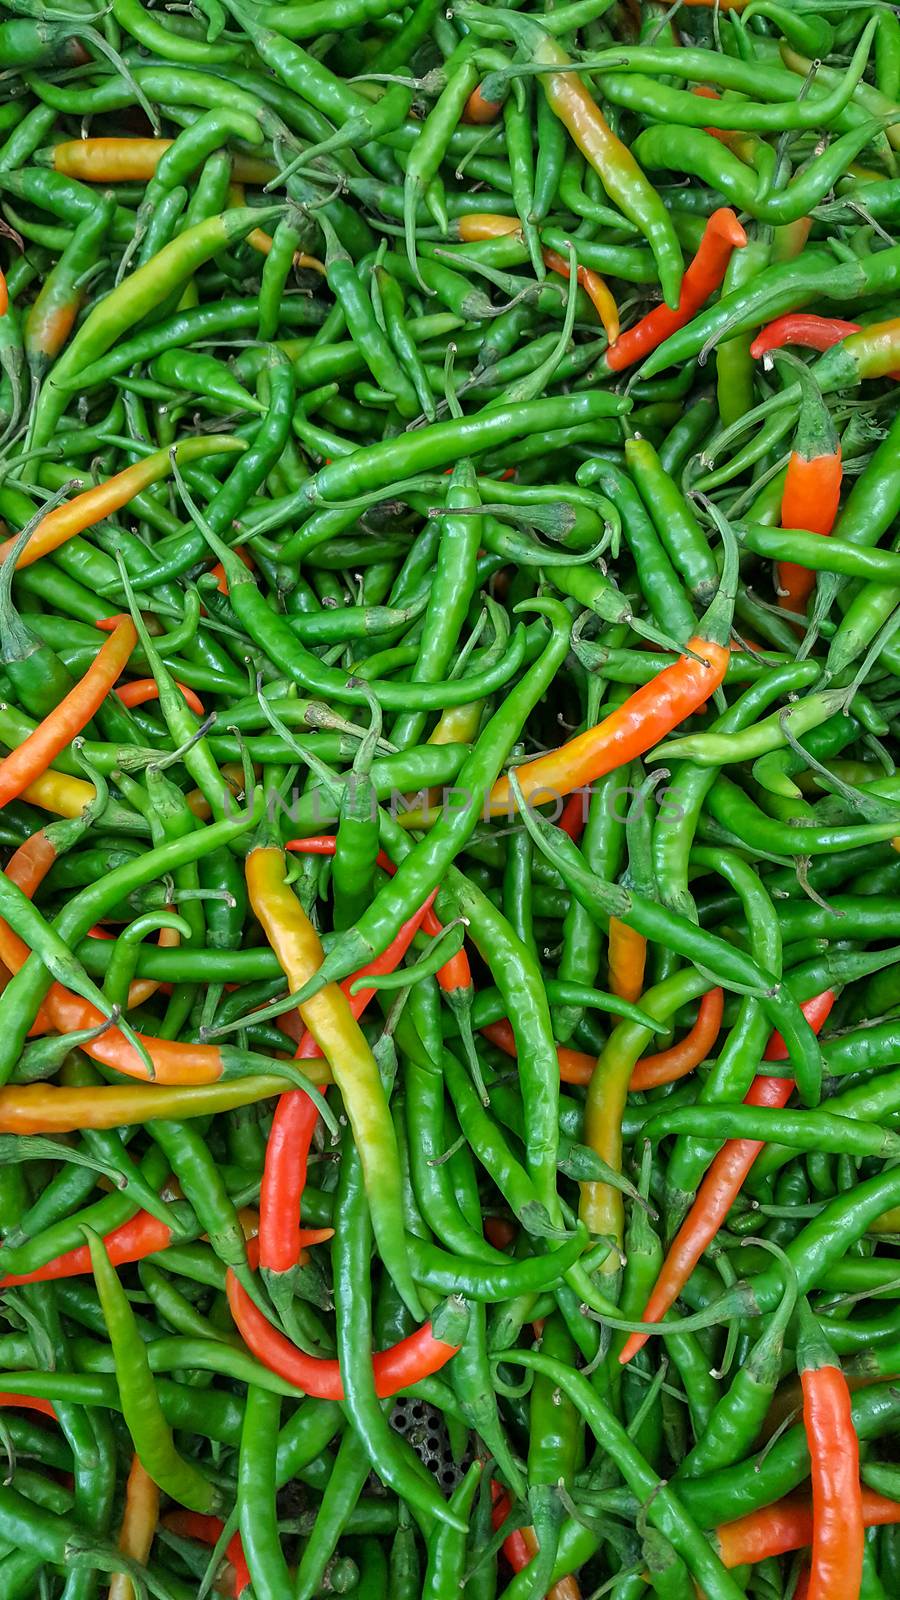 Green and red chillies by magicbones